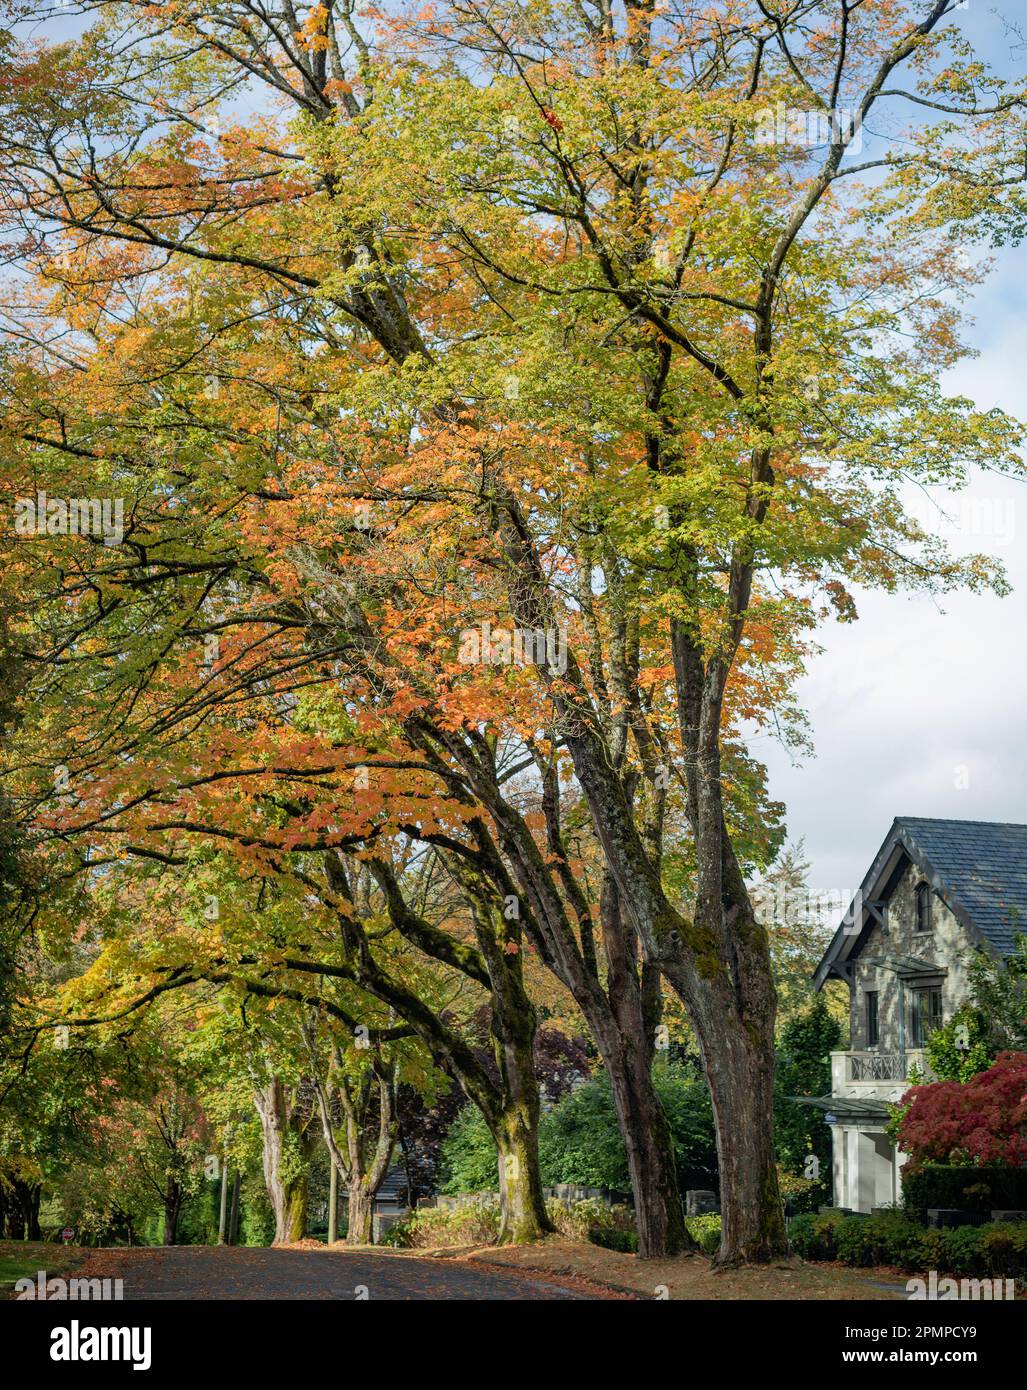 Residential street with leaves changing colour in autumn; Vancouver, British Columbia, Canada Stock Photo